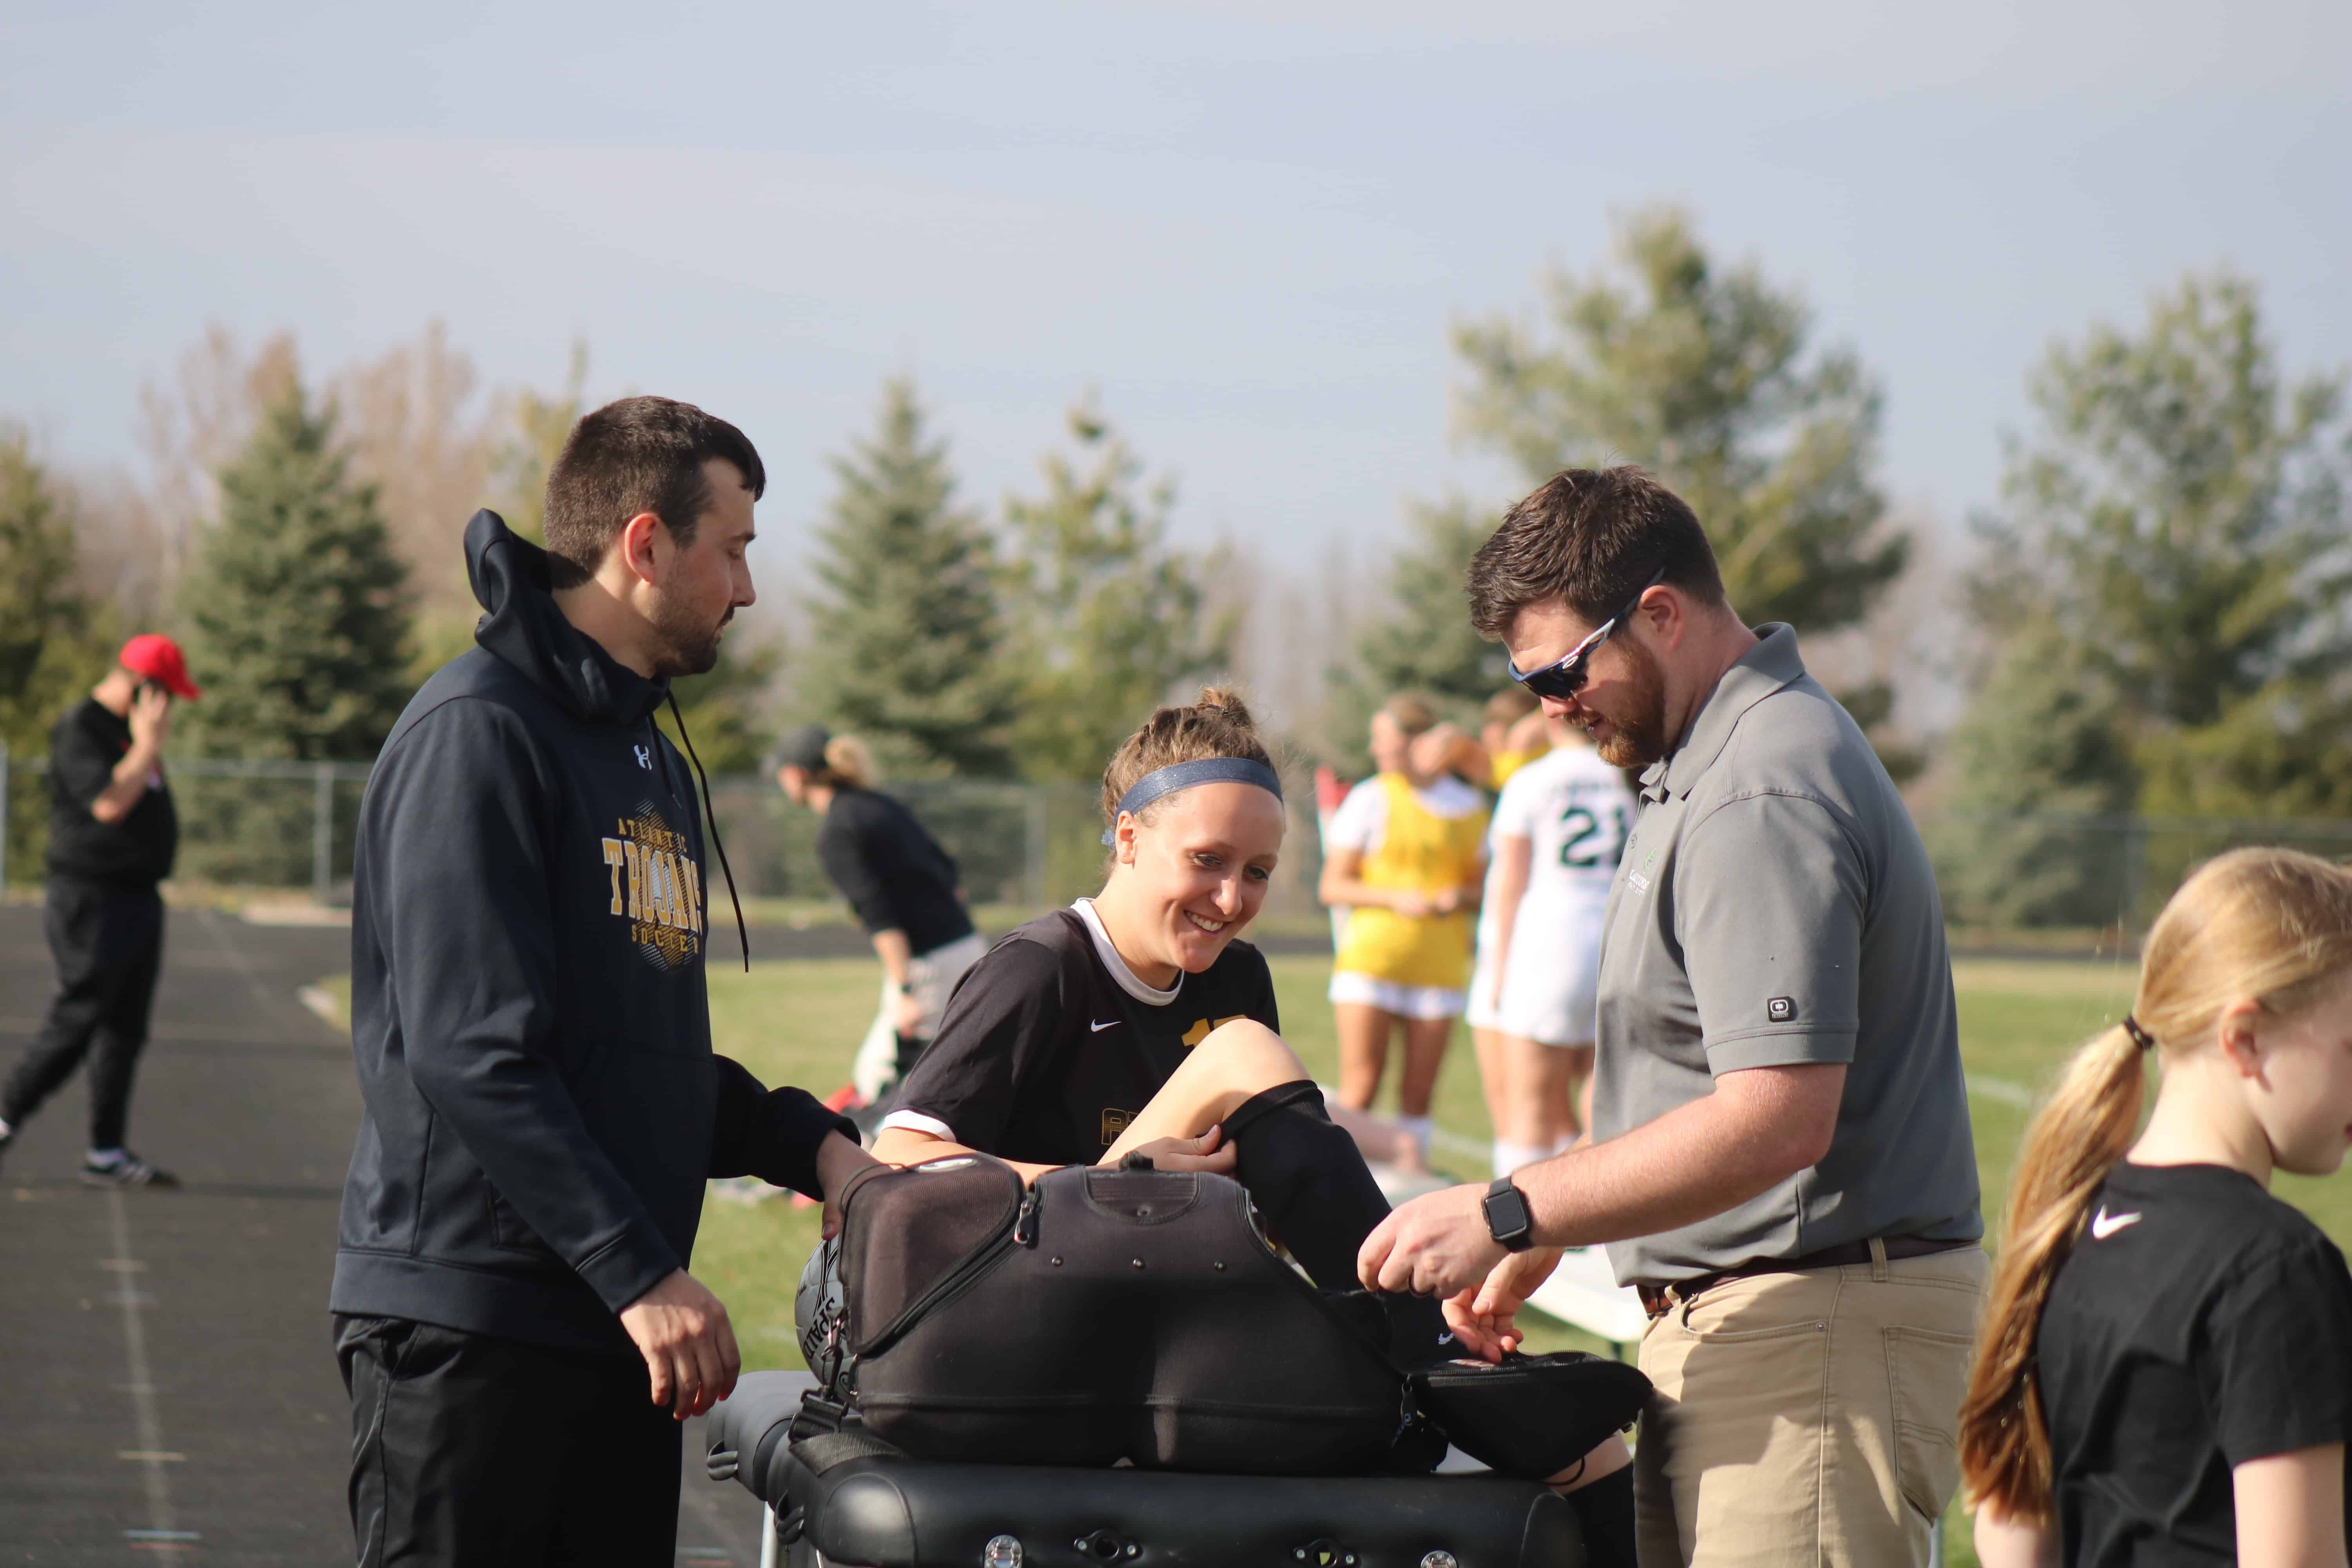 Andy Niemann, AT-C working with female soccer player